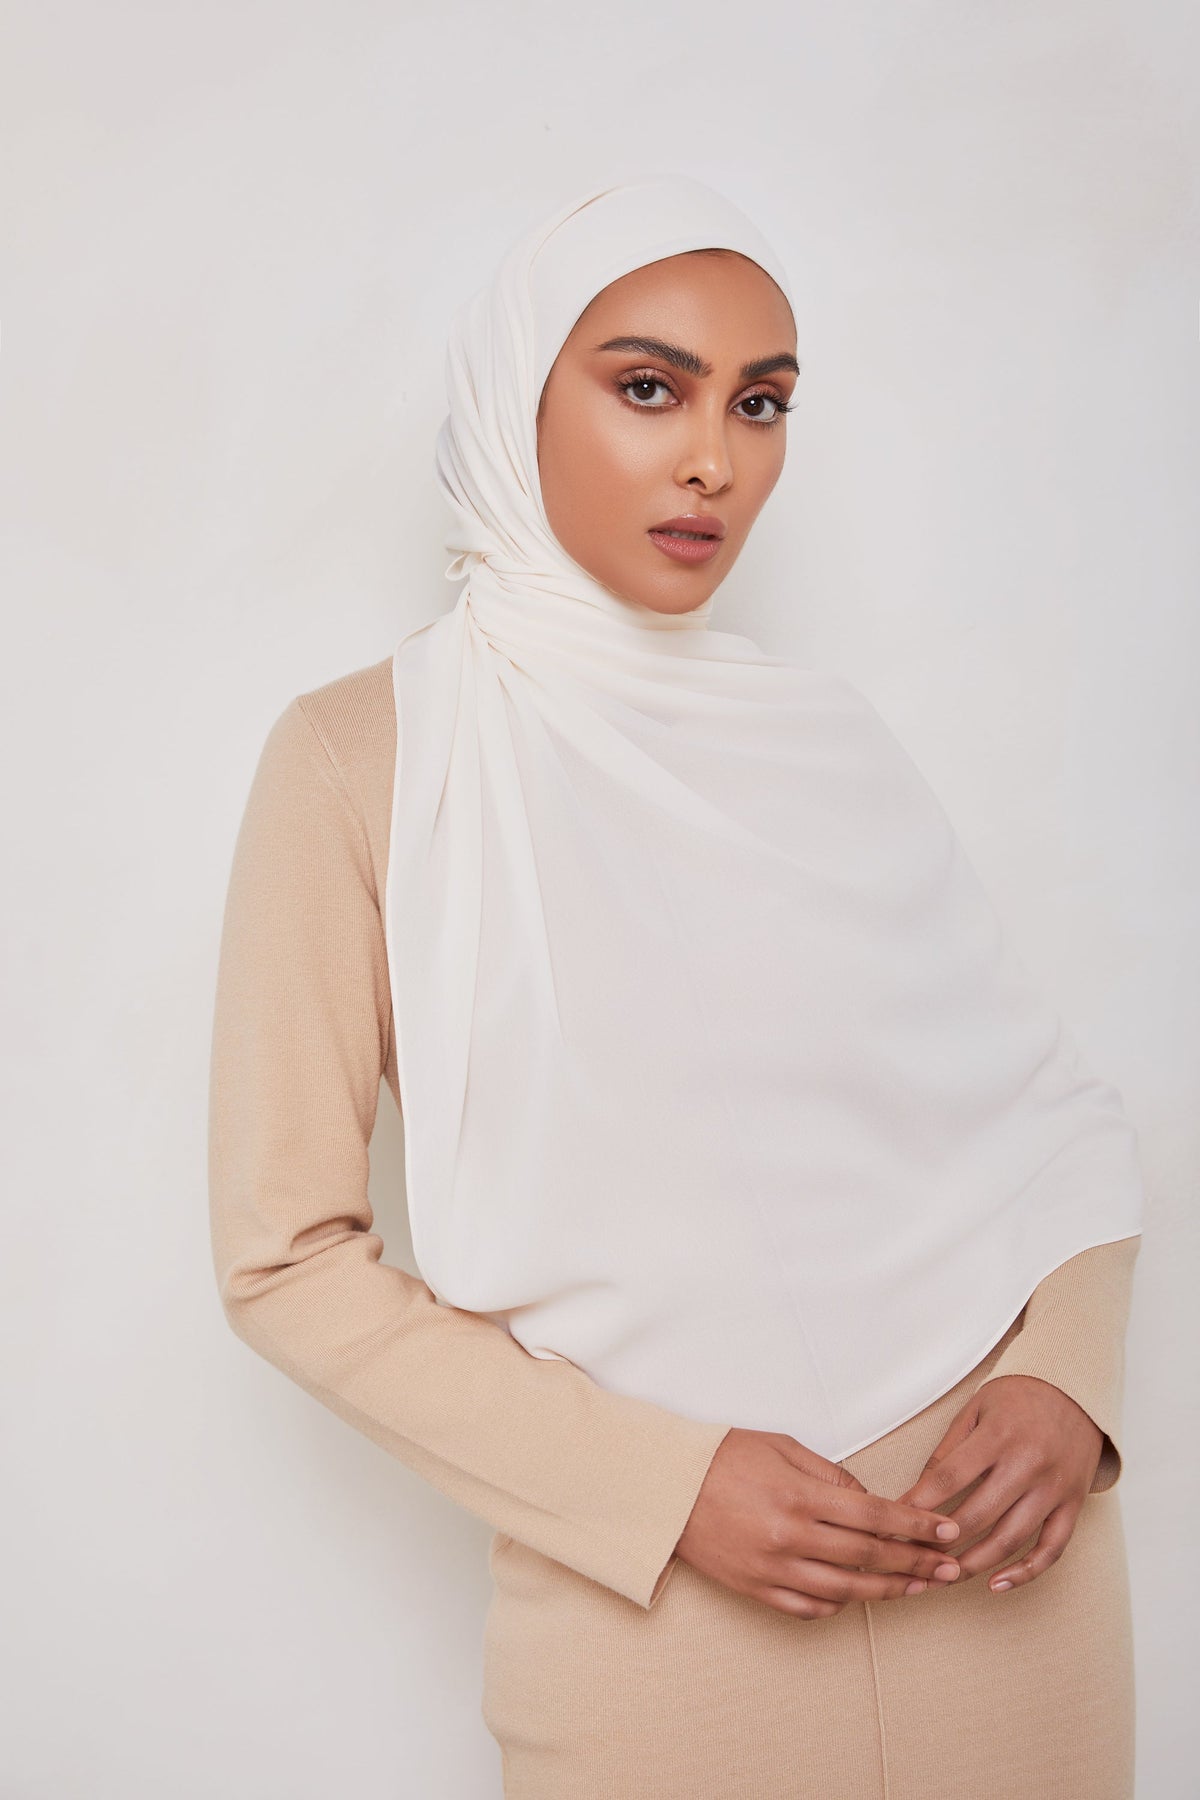 TEXTURE Everyday Chiffon Hijab - Not White Veiled Collection 